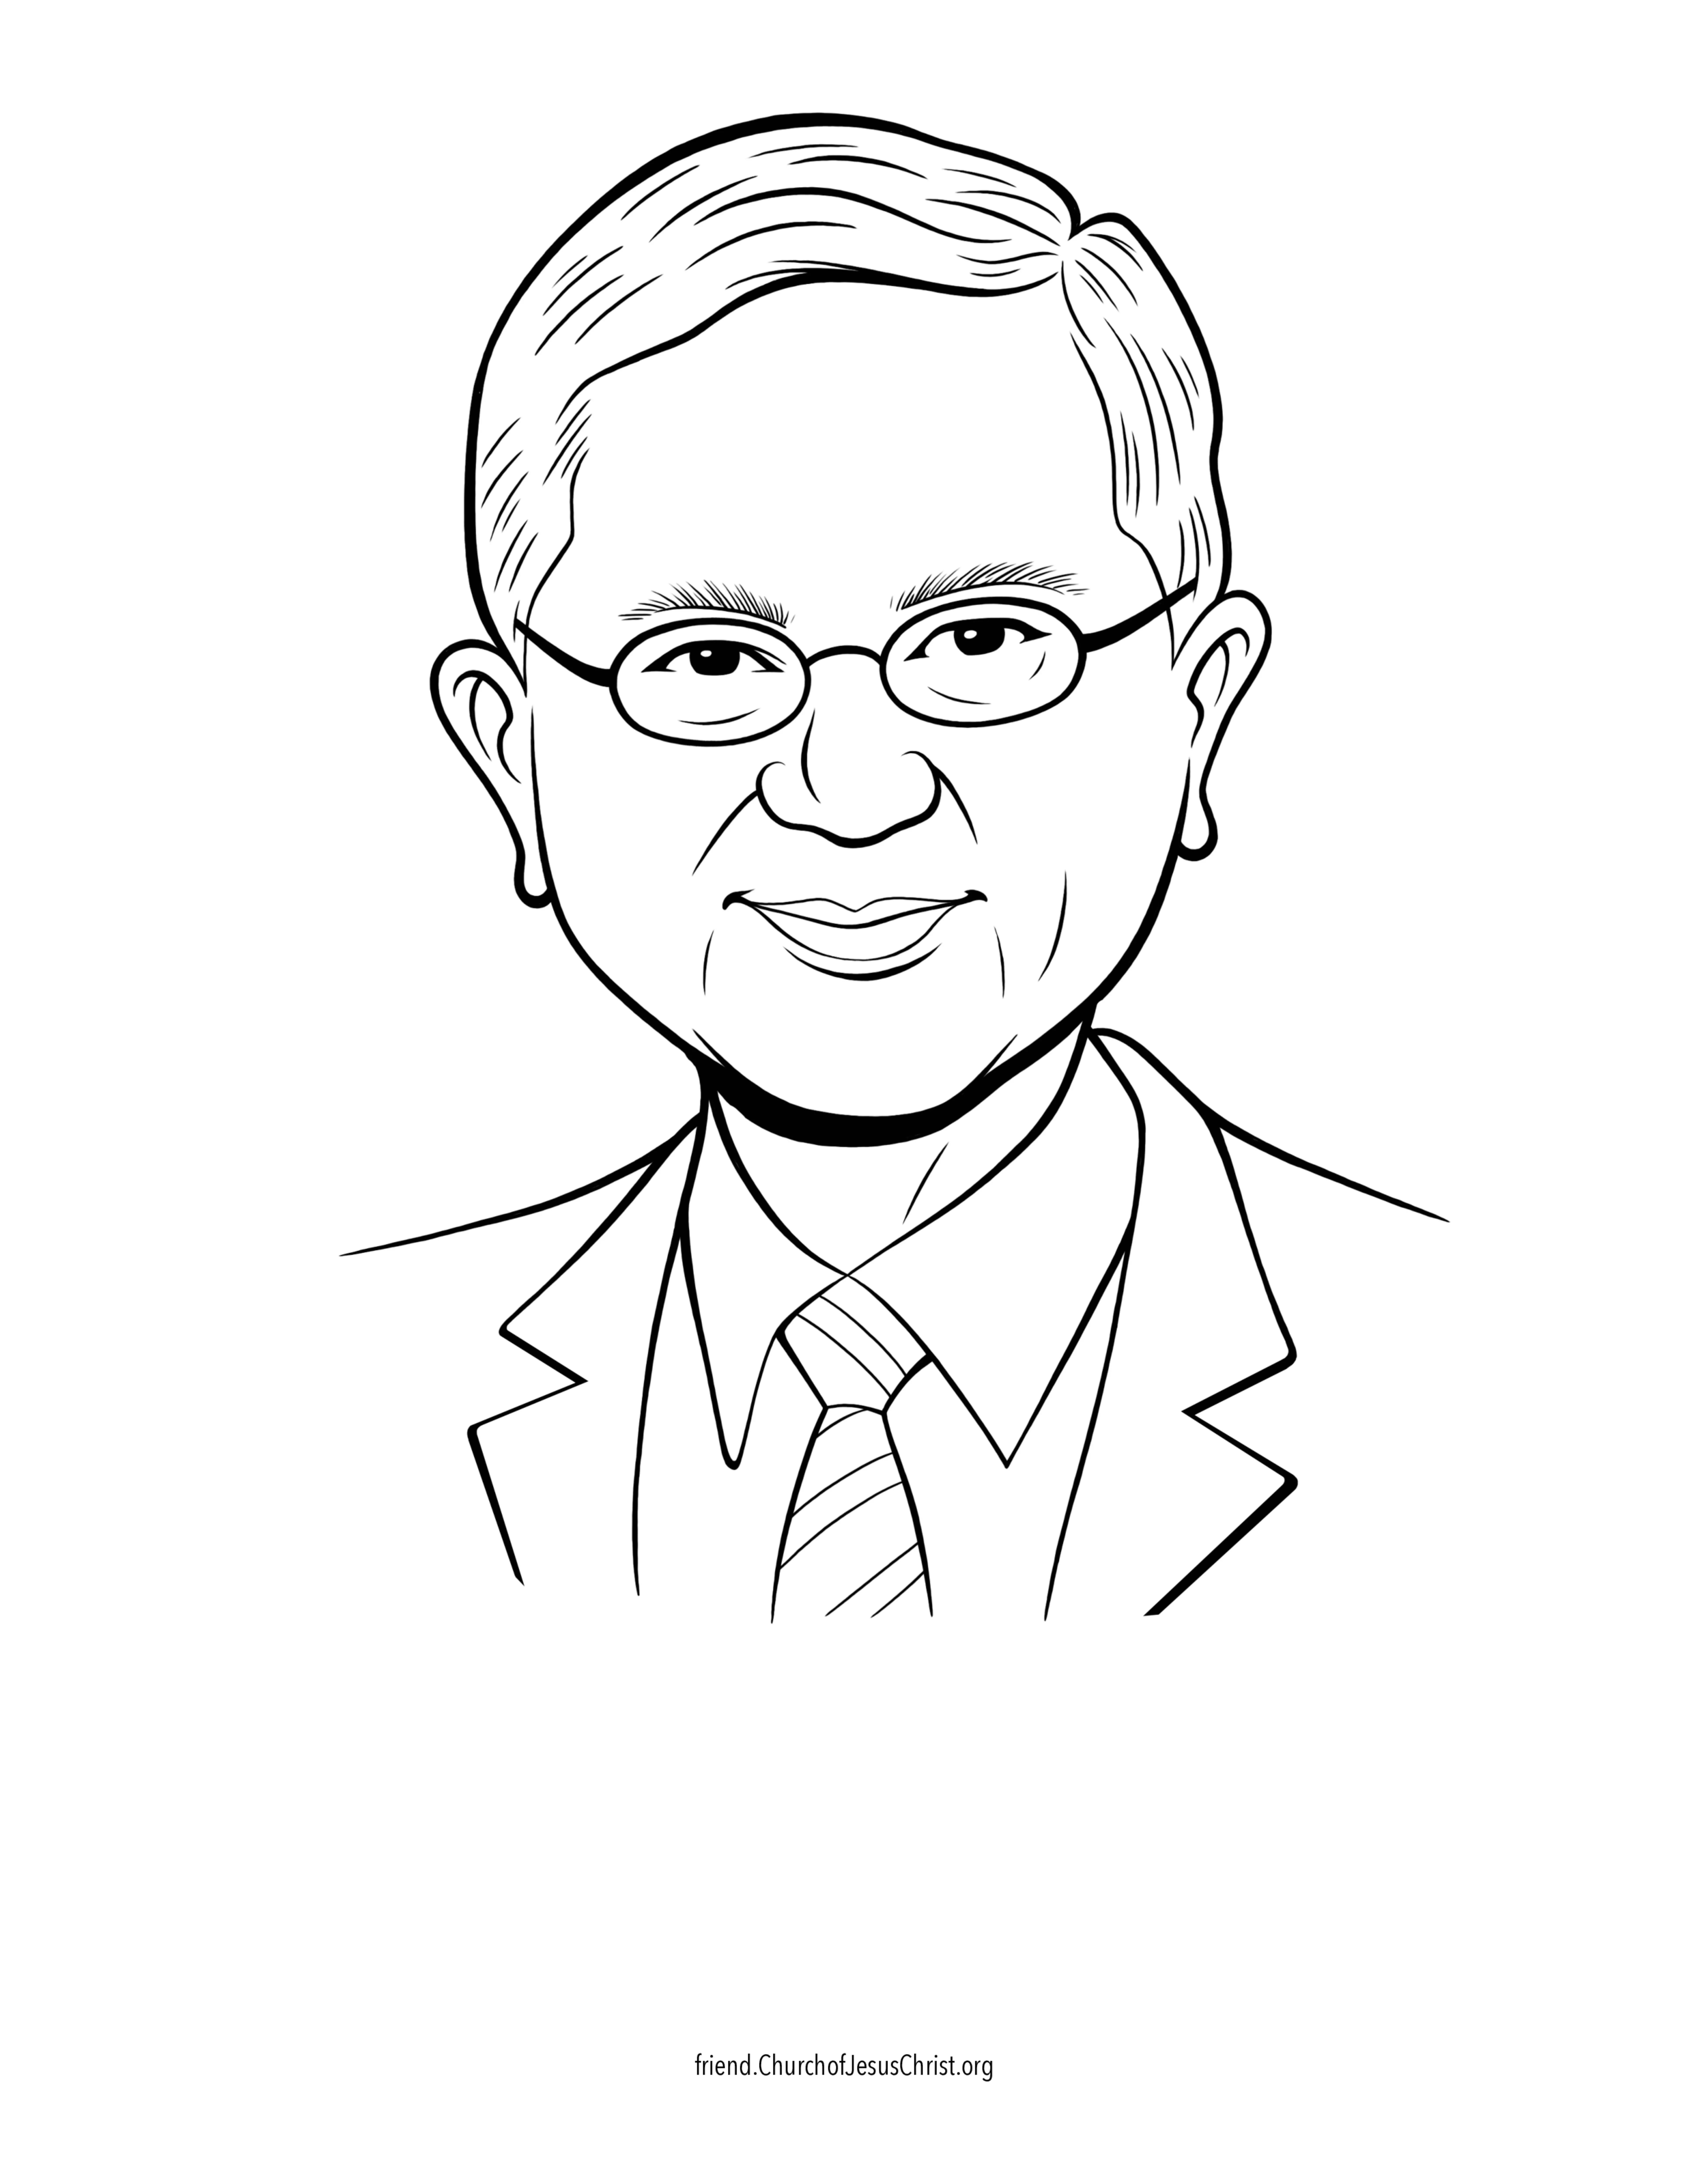 A coloring page of the official portrait of Gerritt W. Gong.